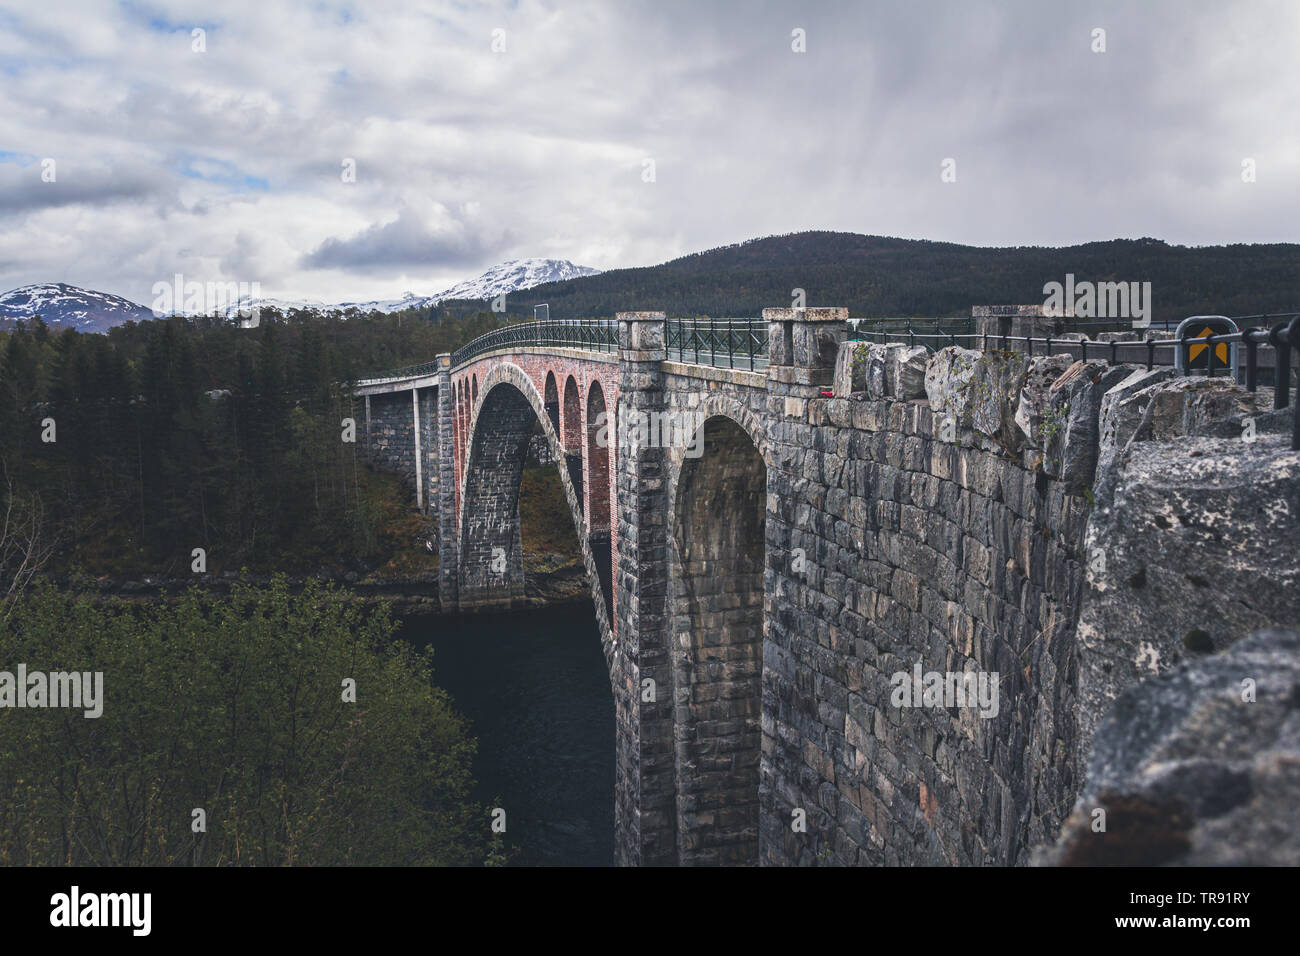 Old and very high stone bridge called Skodjebrua in Norway. Stock Photo